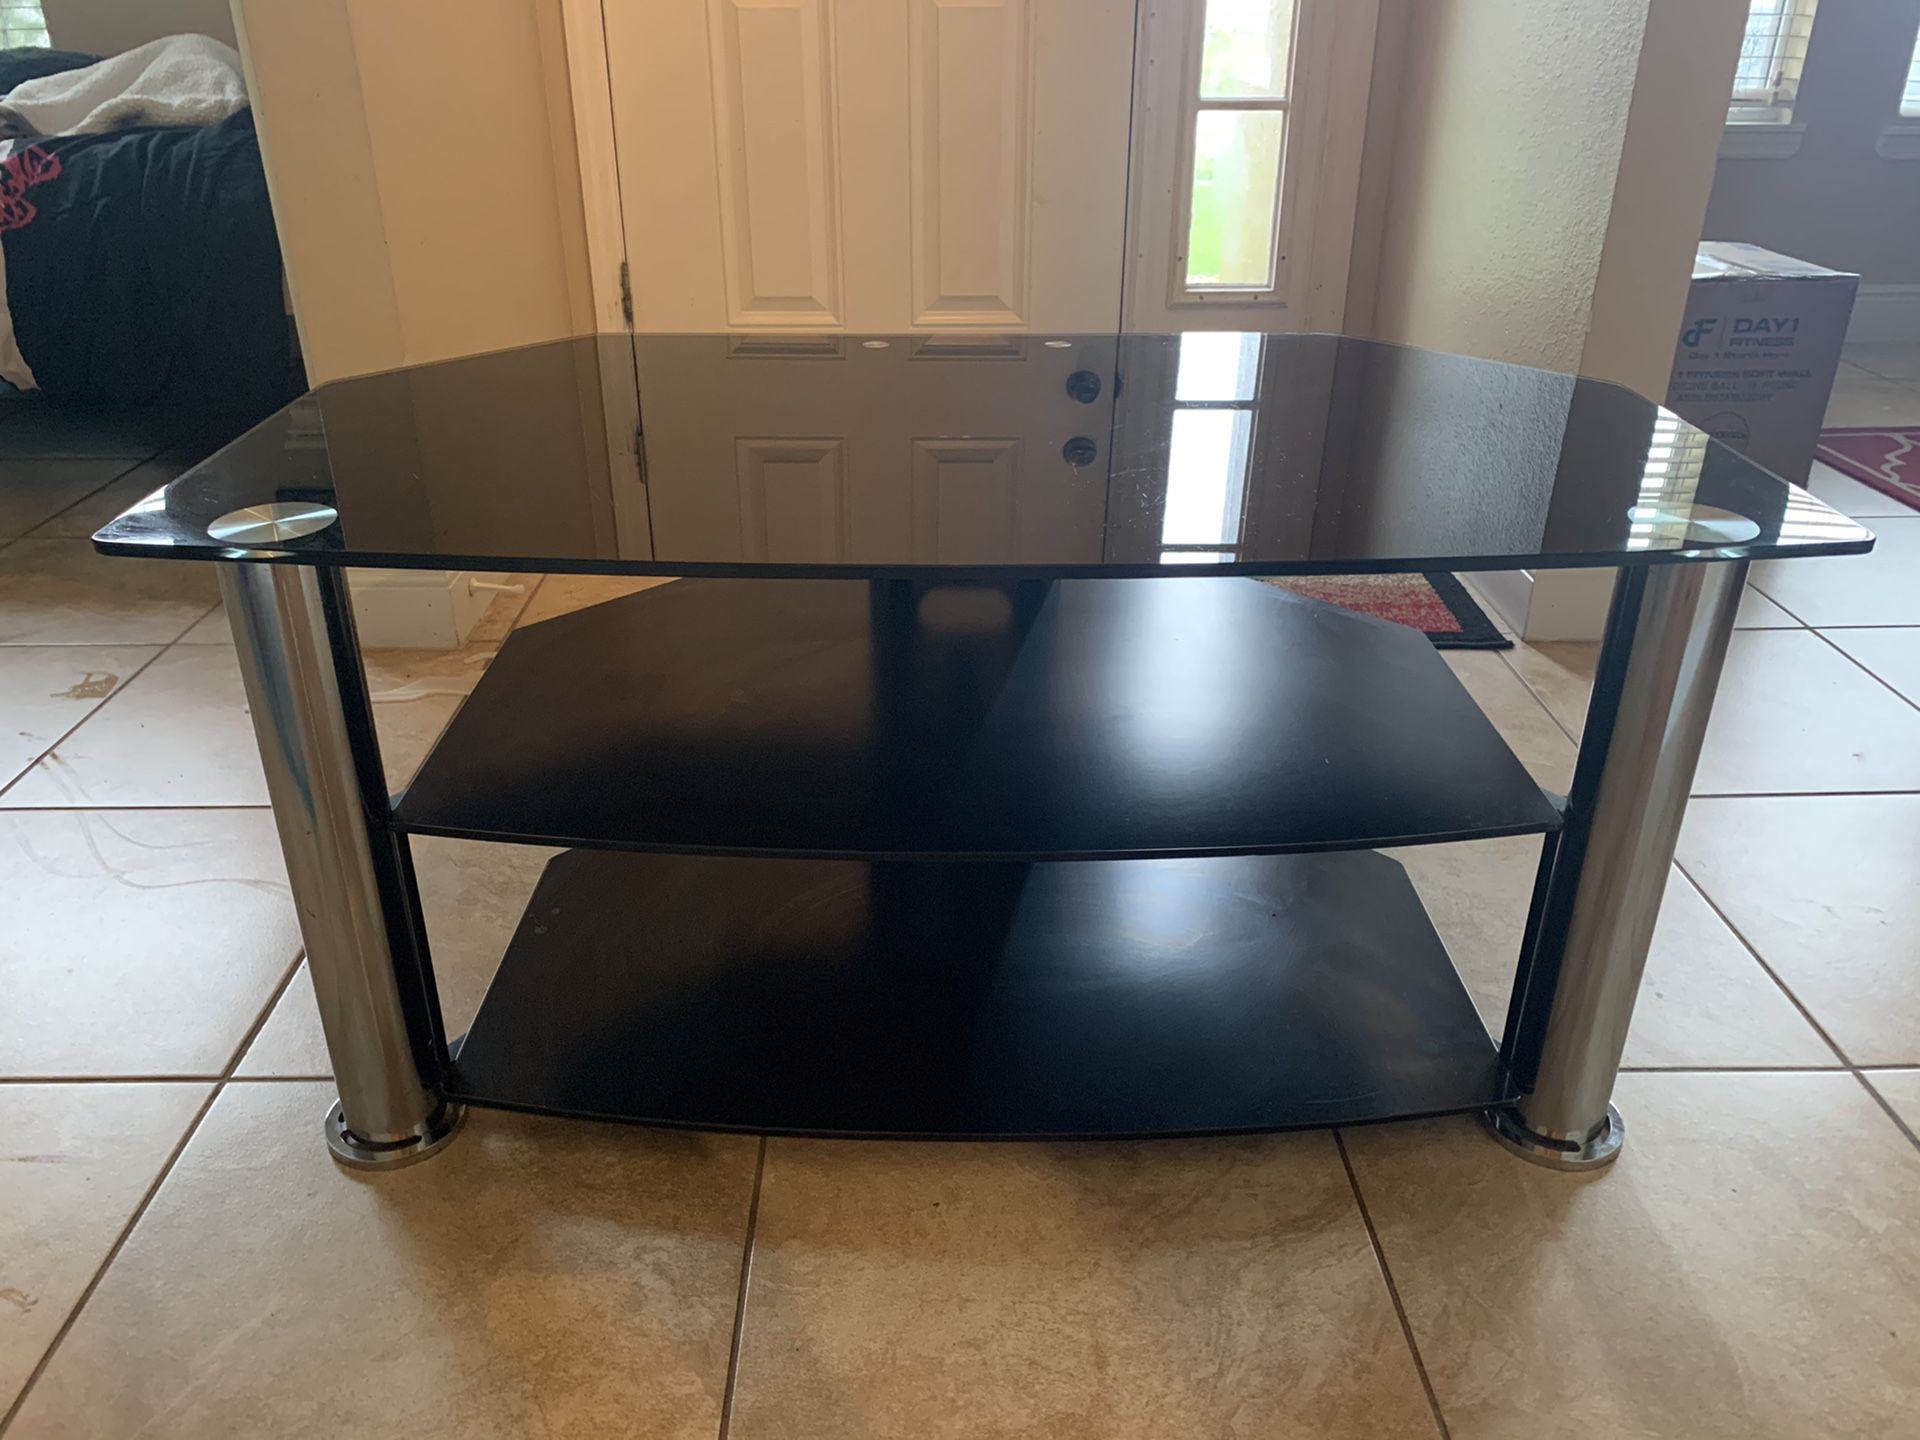 Black and silver TV stand